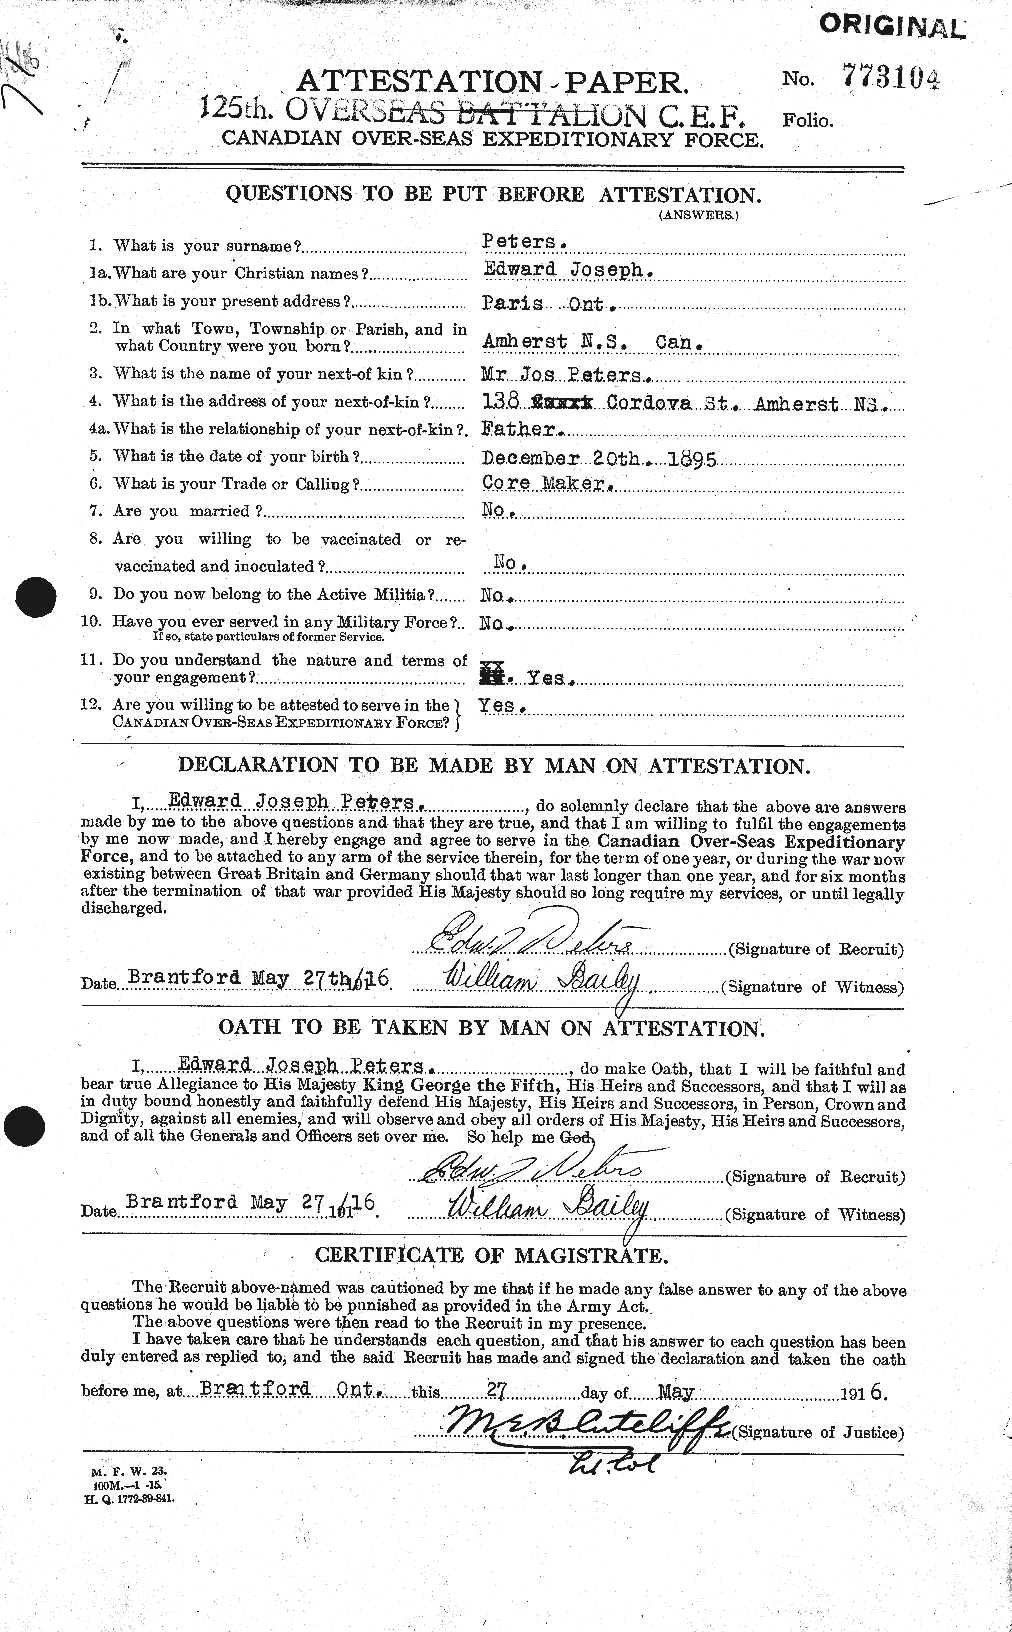 Personnel Records of the First World War - CEF 575409a